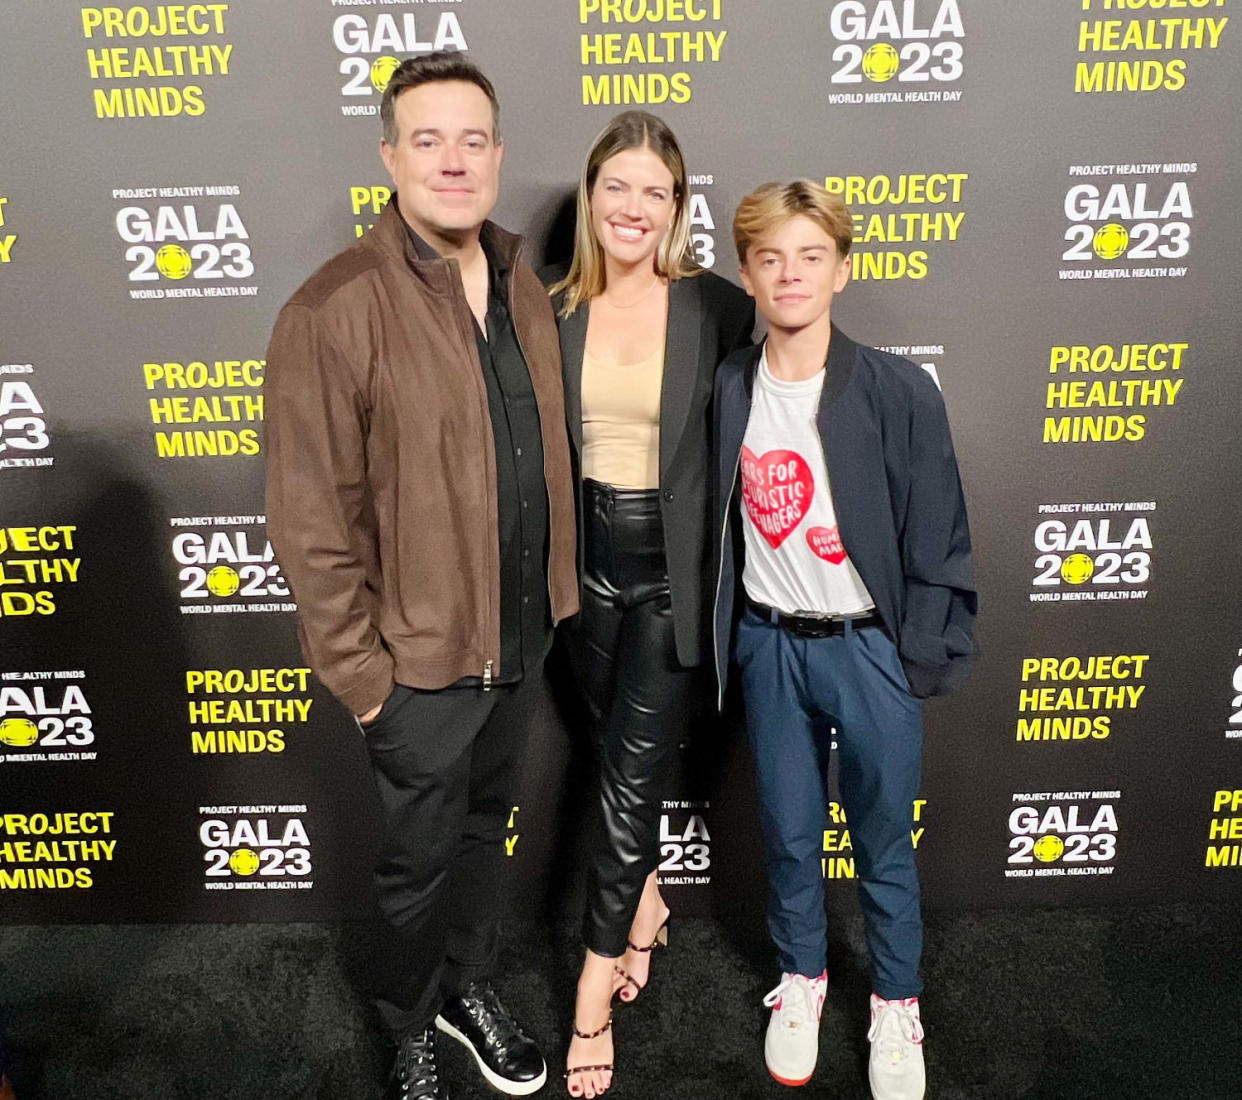 Carson Daly was joined by his wife and son at the gala. (Megan Stackhouse)